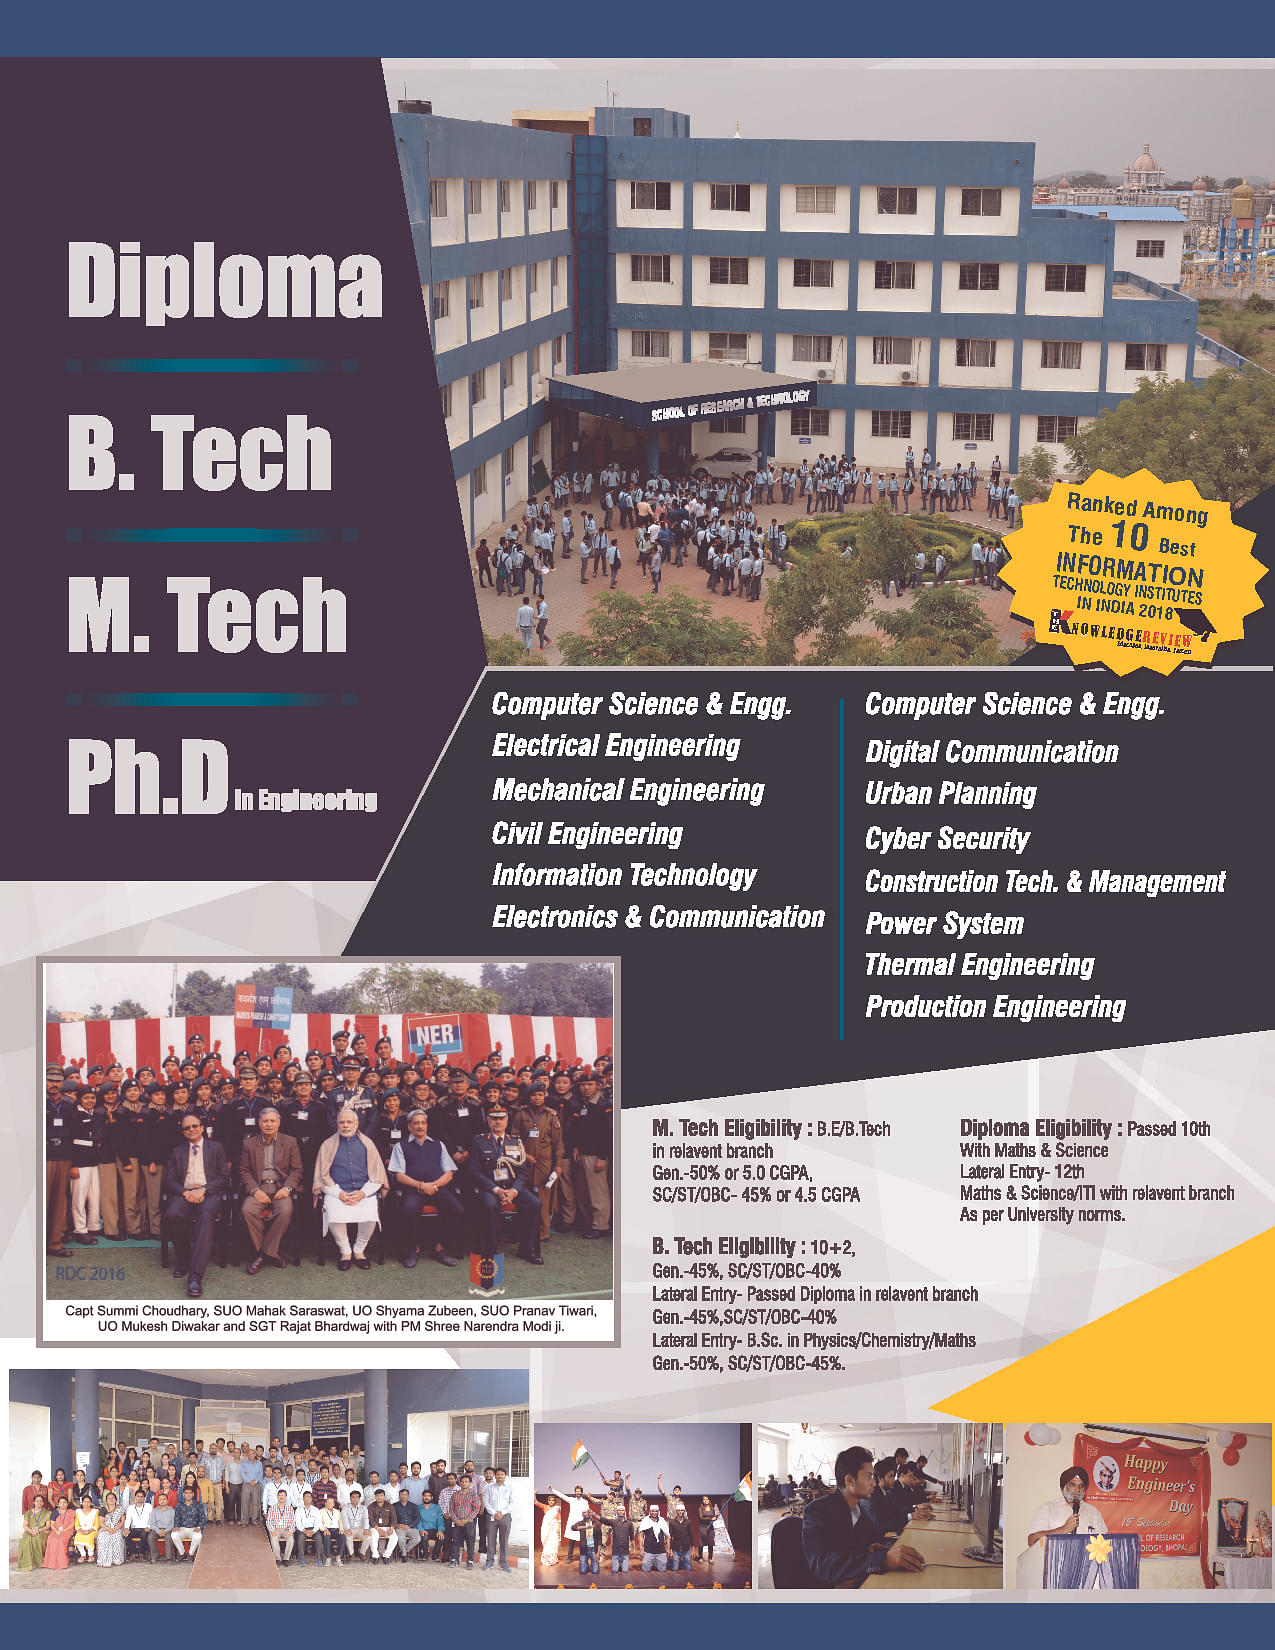 People's University, Bhopal - Admissions, Contact, Website, Facilities